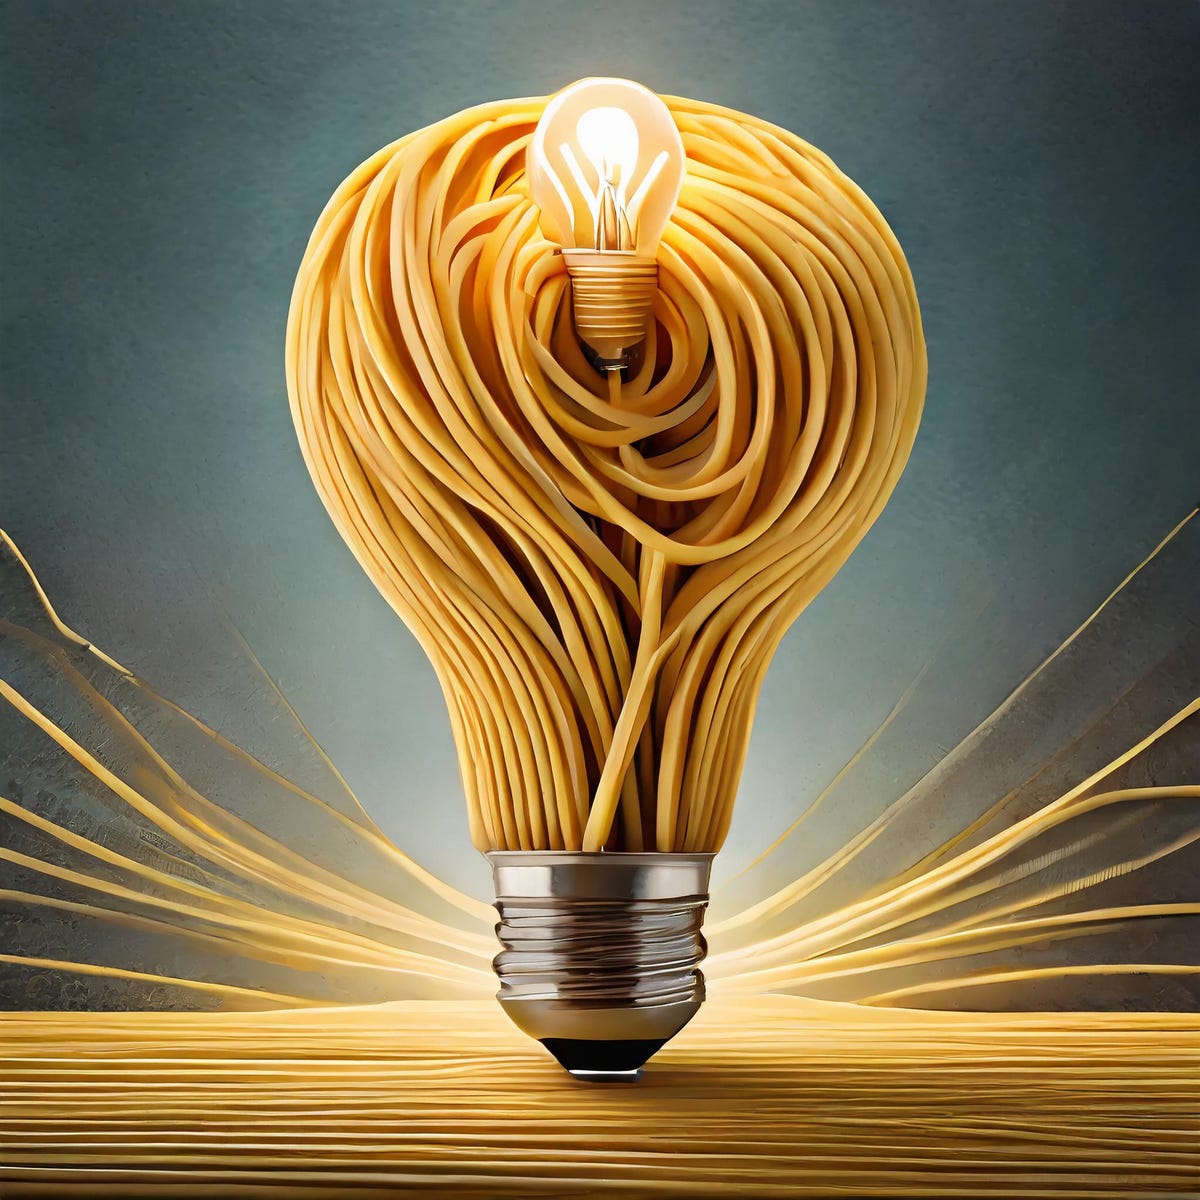 An AI-generated image of a lightbulb made of spaghetti with a smaller ordinary lightbulb tucked inside